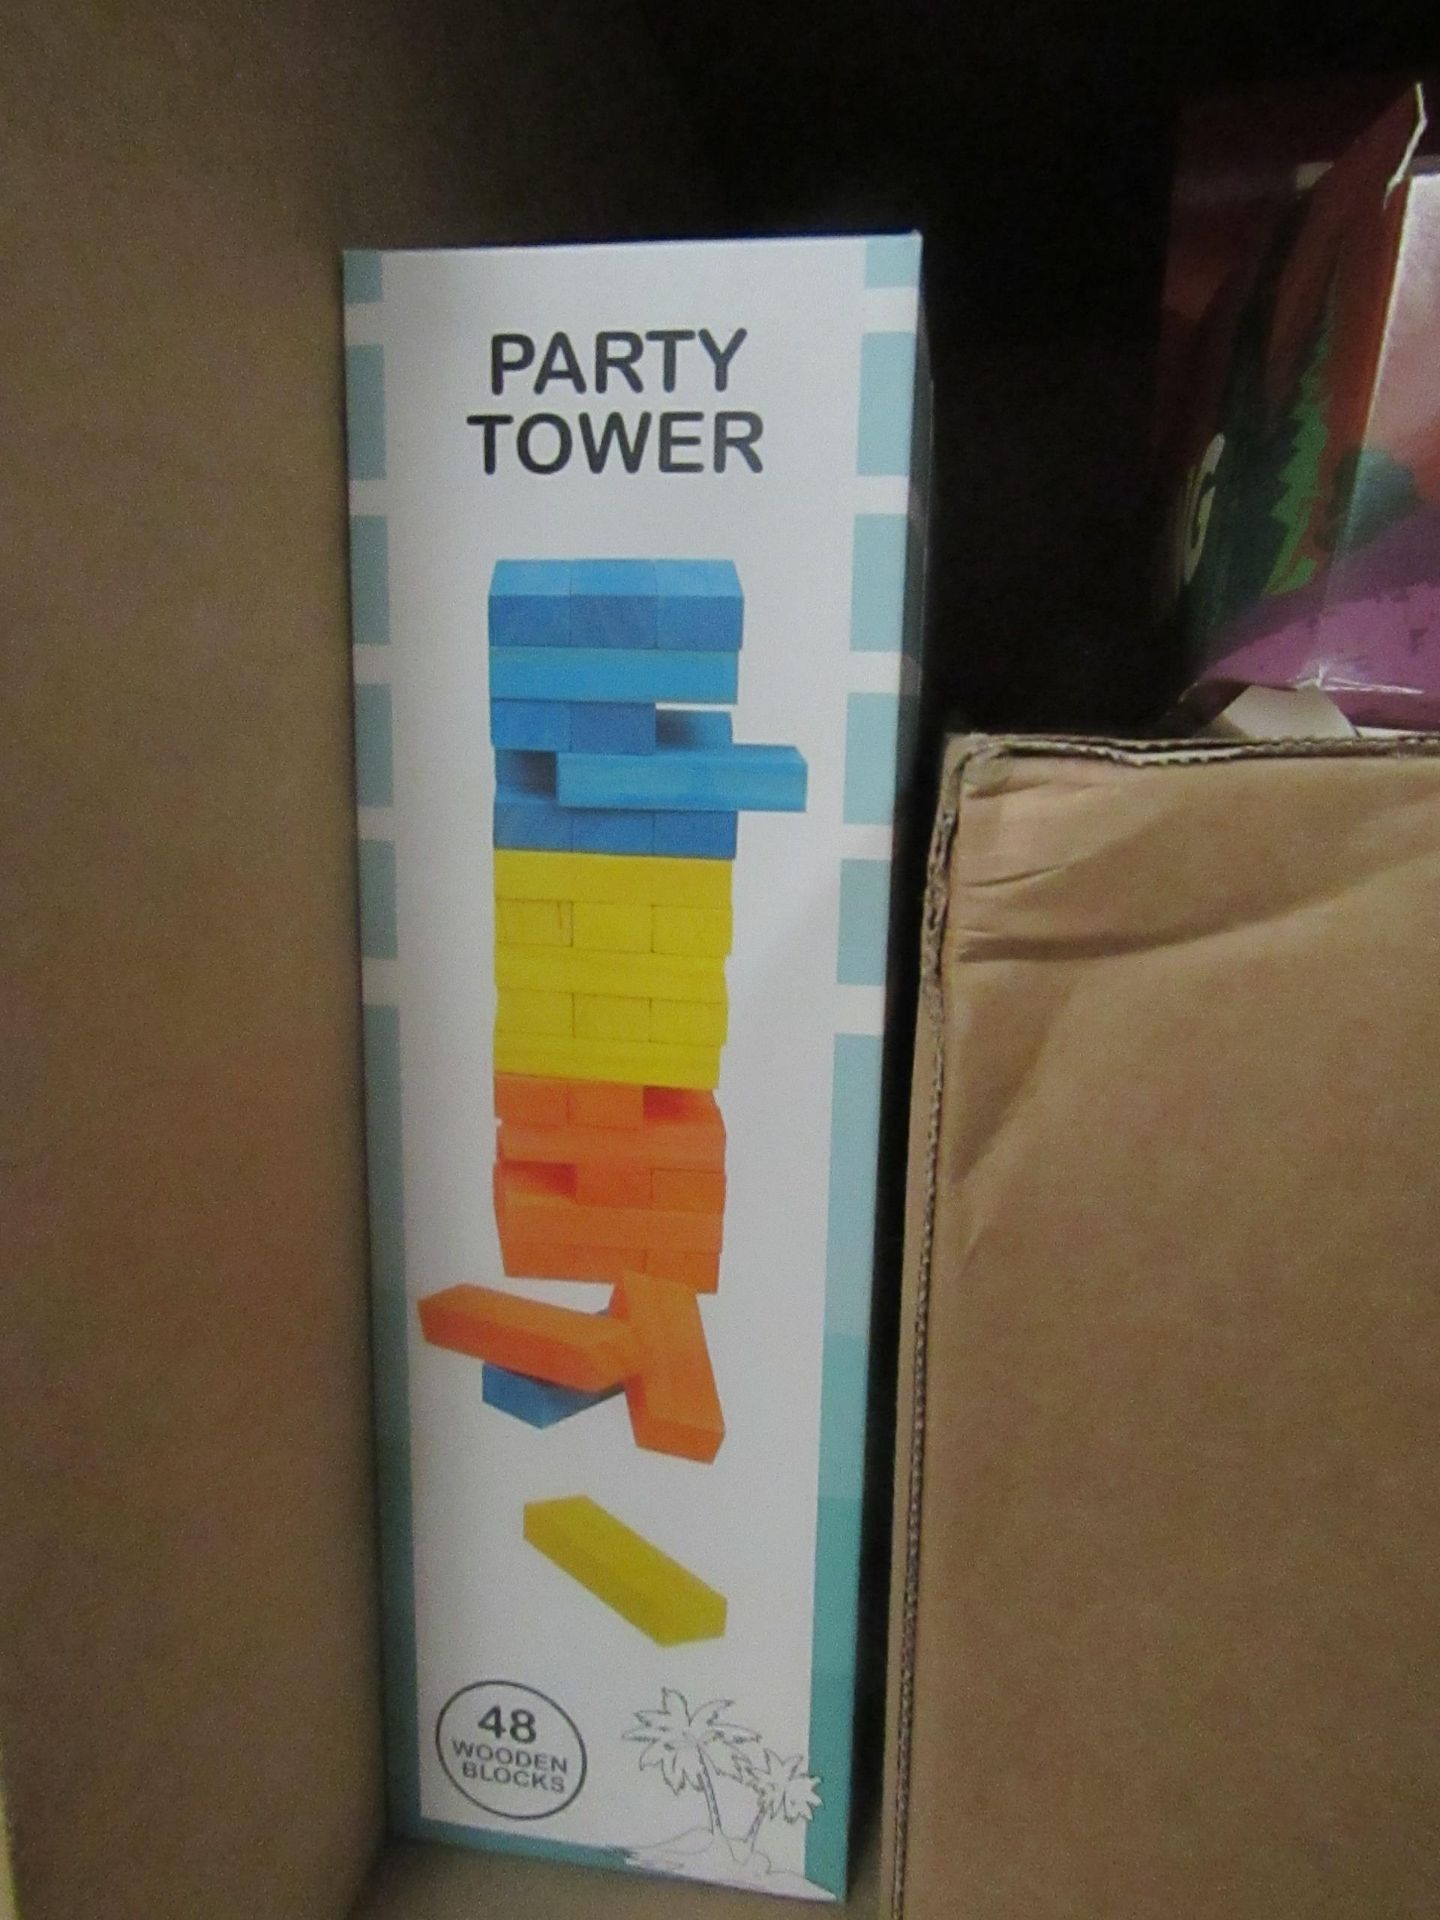 Party tower, 48 wooden blocks, New & Boxed